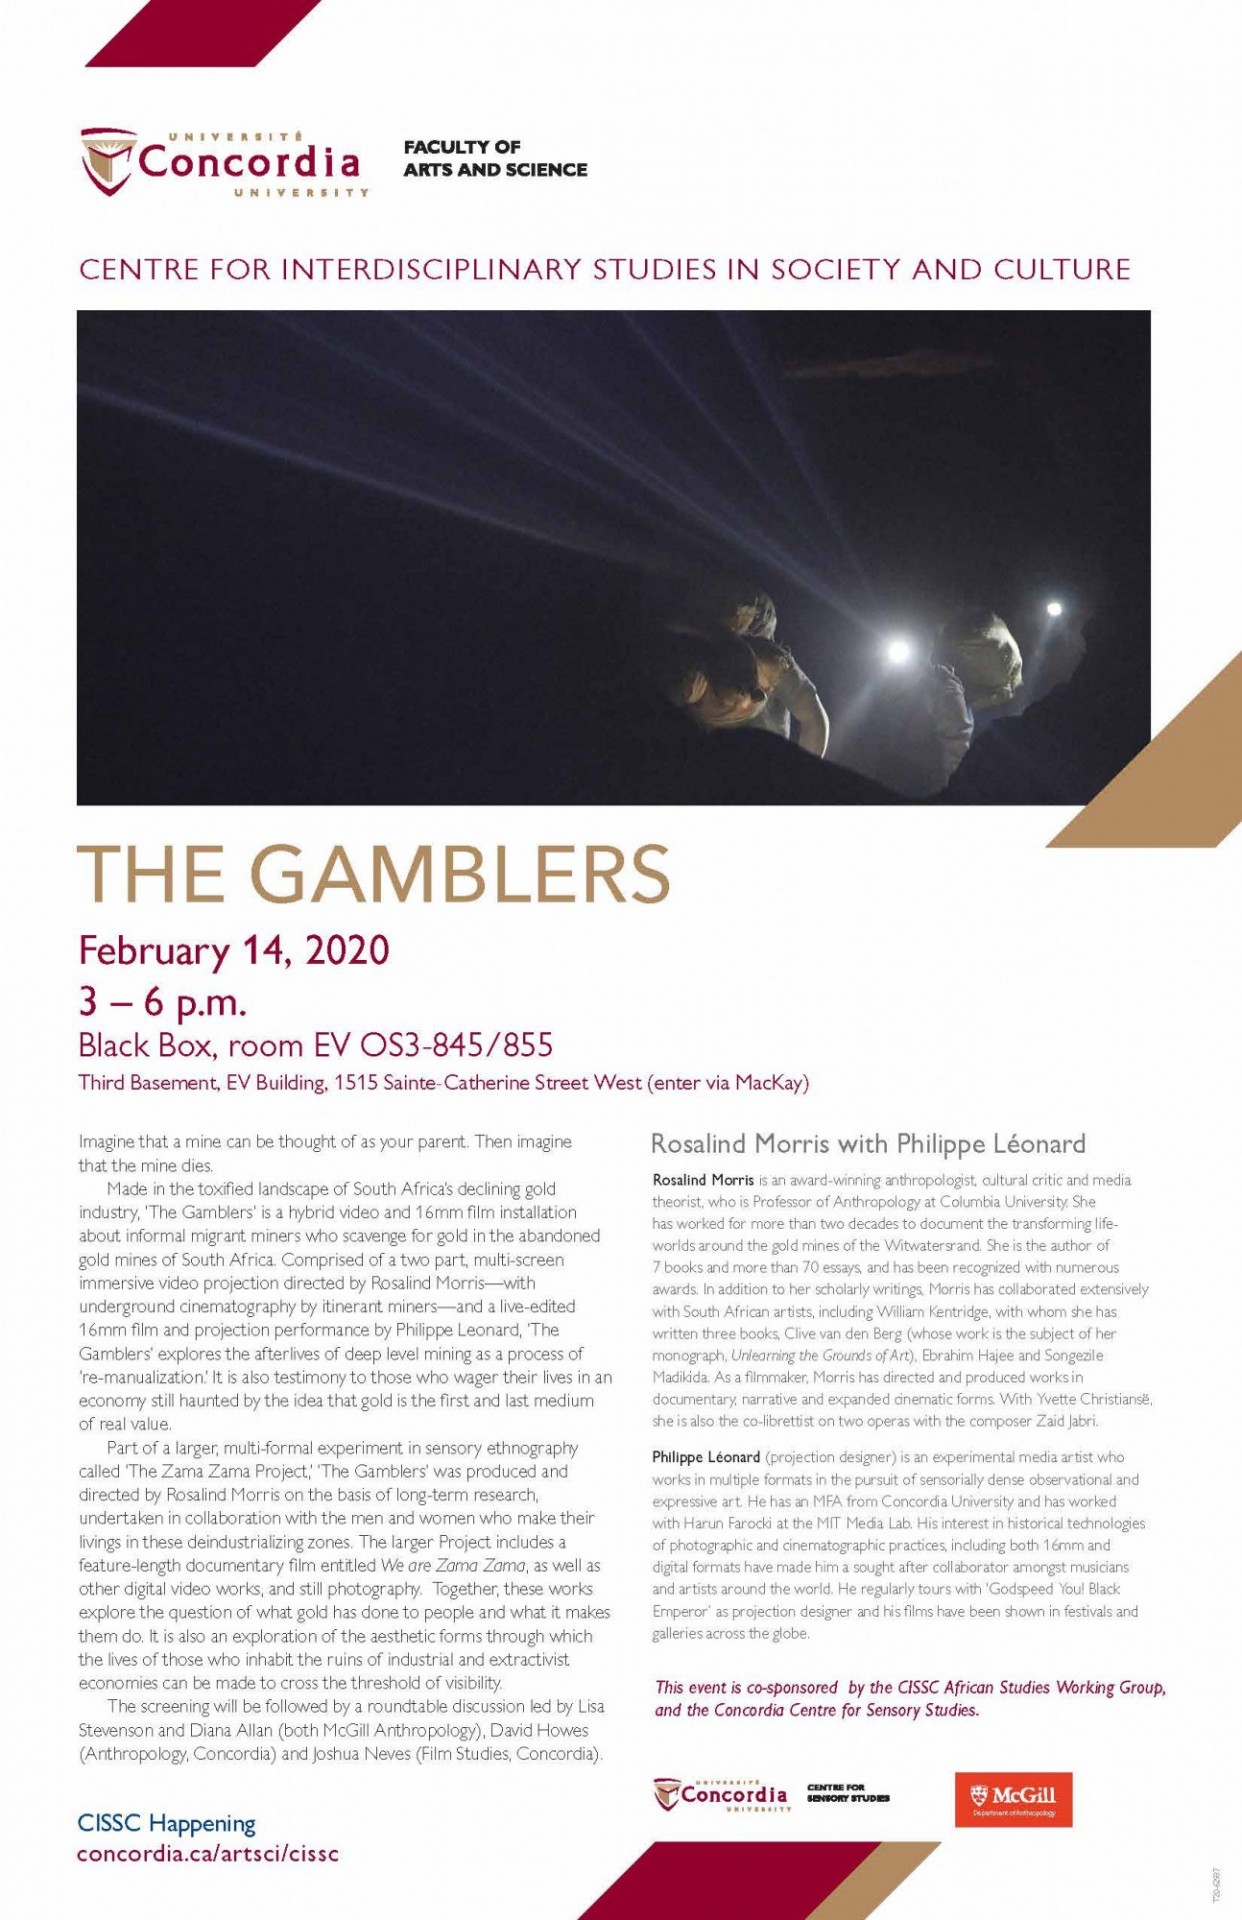 Poster for 'The Gamblers' featuring text about the project and an image from the film.